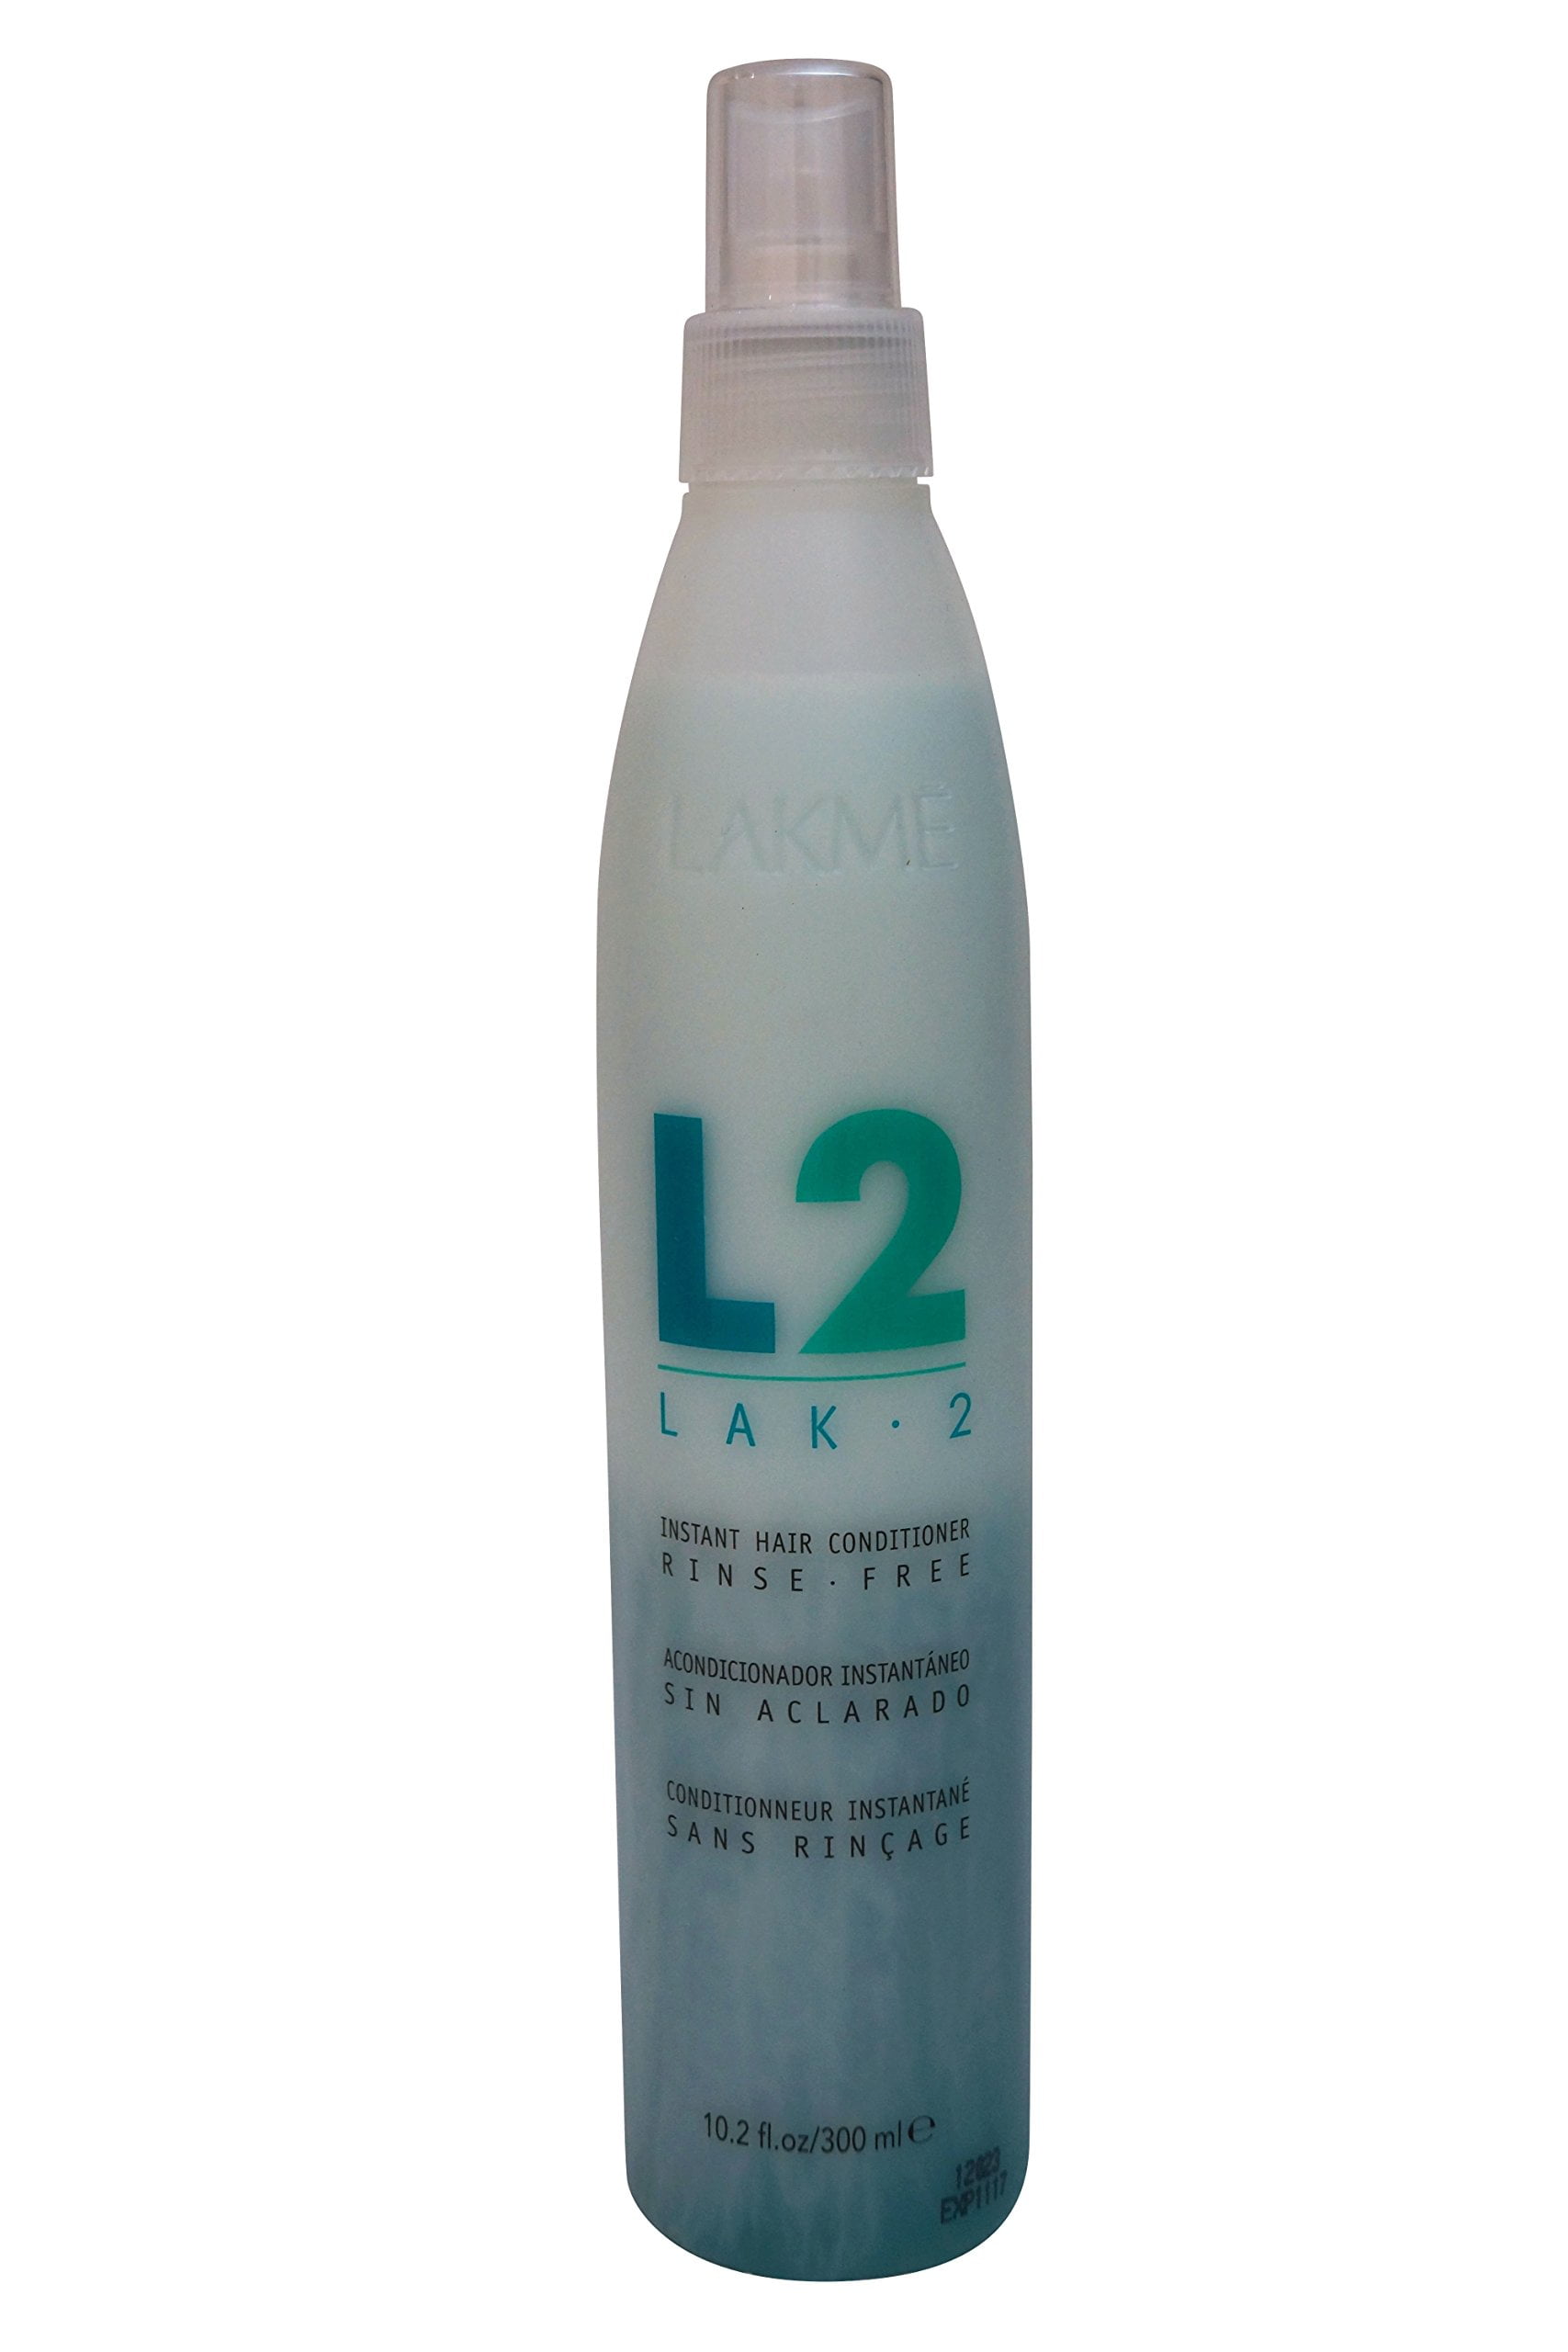 Lakme Lak 2 Instant Hair Conditioner 10.2 Oz - image 1 of 2